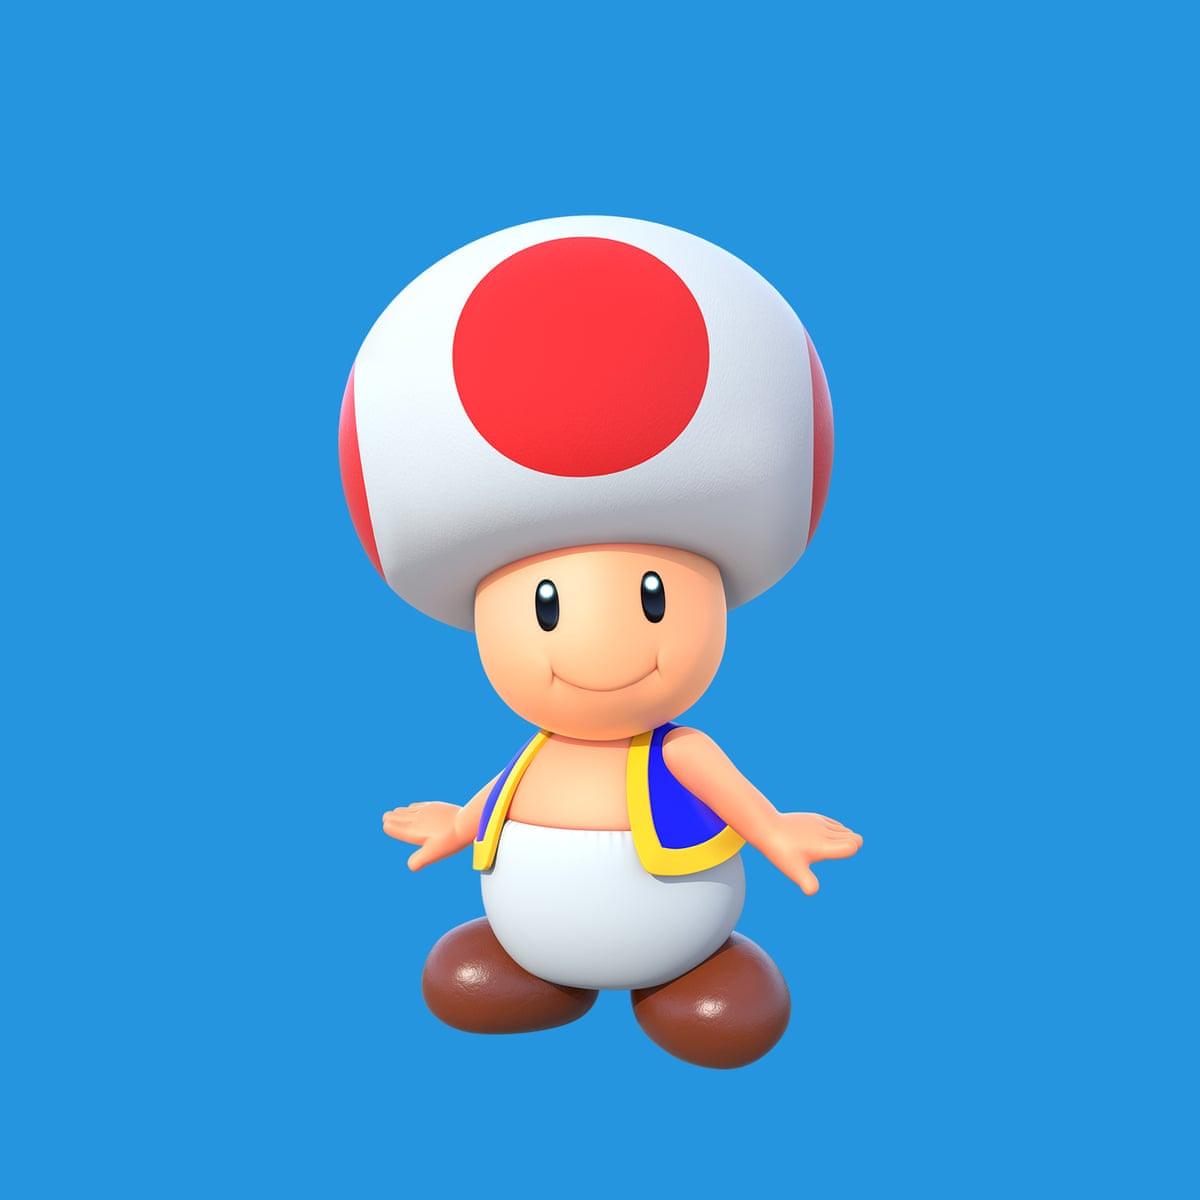 Fun guy: is that Toad from Mario's head or is he wearing a hat? | Games |  The Guardian